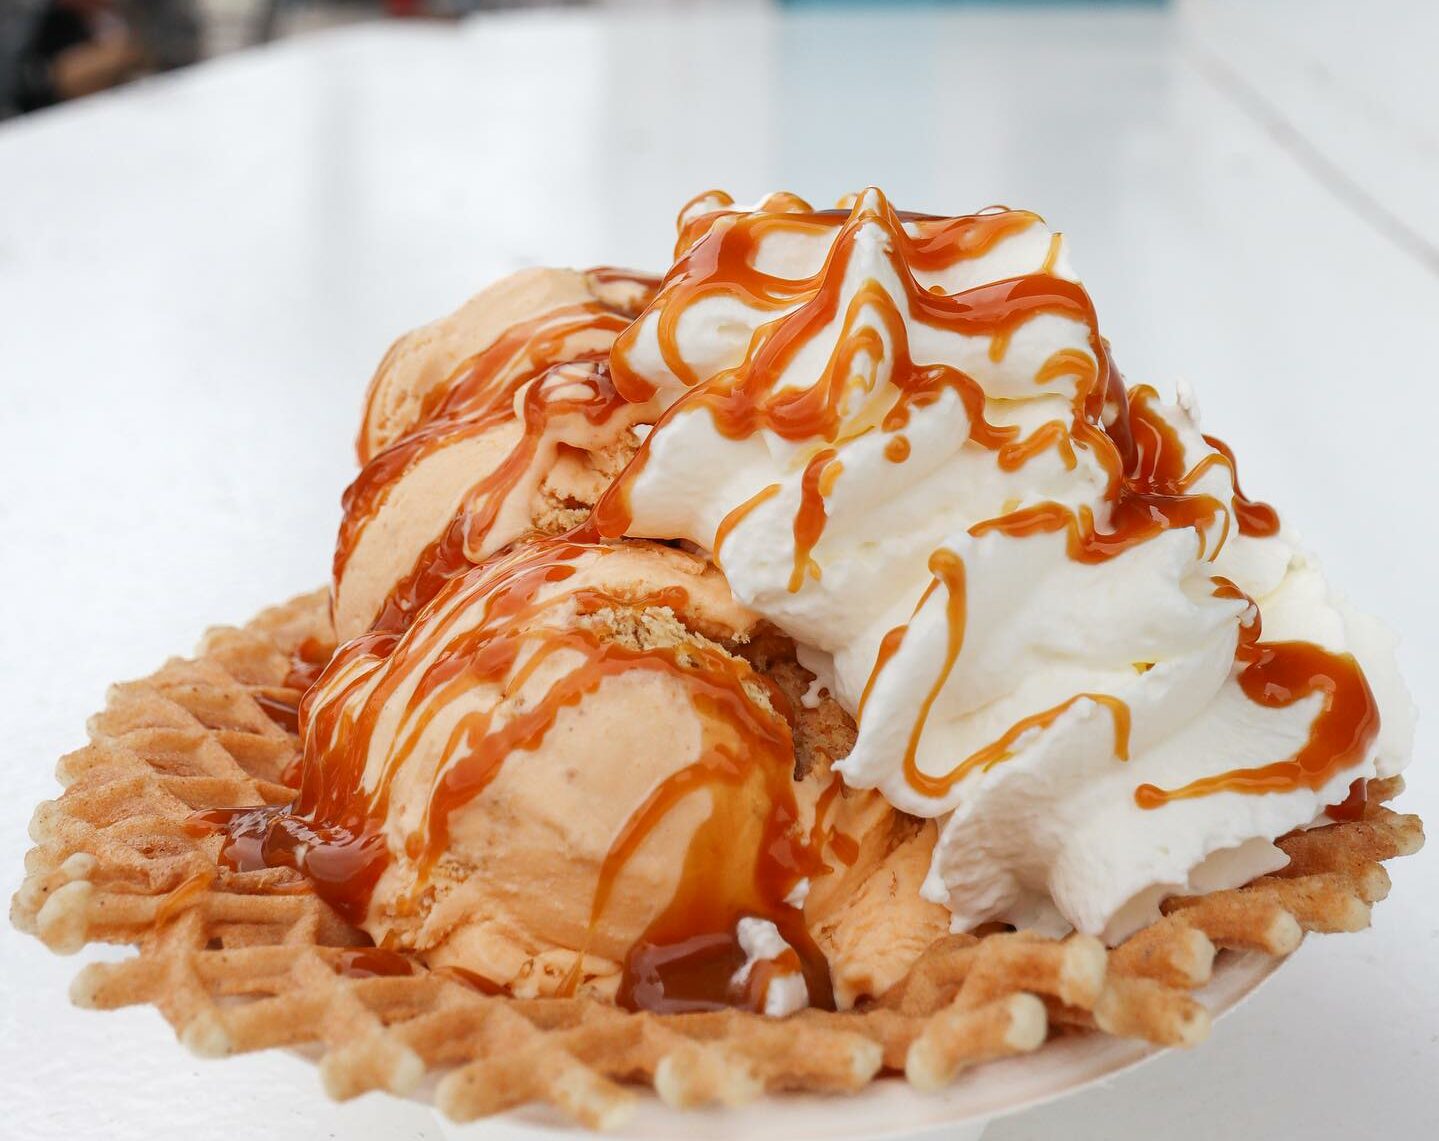 10 of the best places to get ice cream in Myrtle Beach